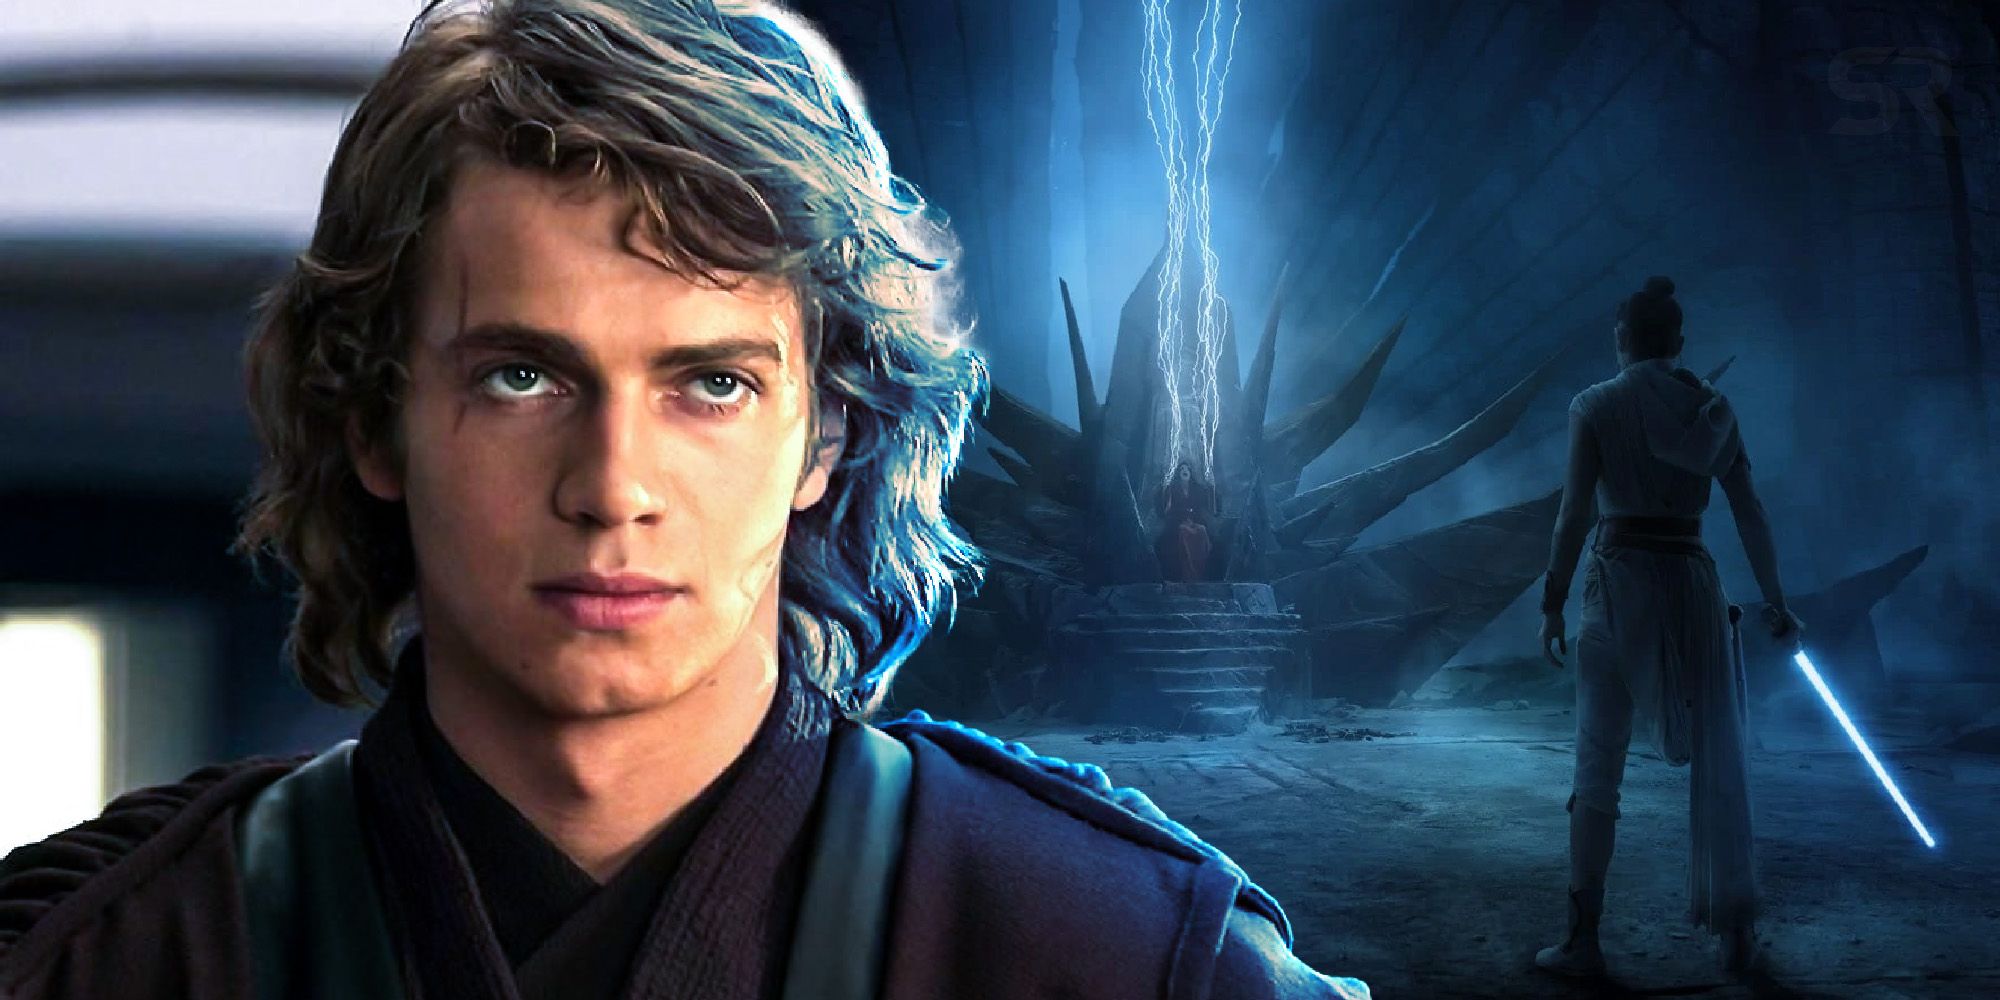 Anakin Star Wars Revenge of the Sith Rey Palpatine looks at the throne in Rise of Skywalker